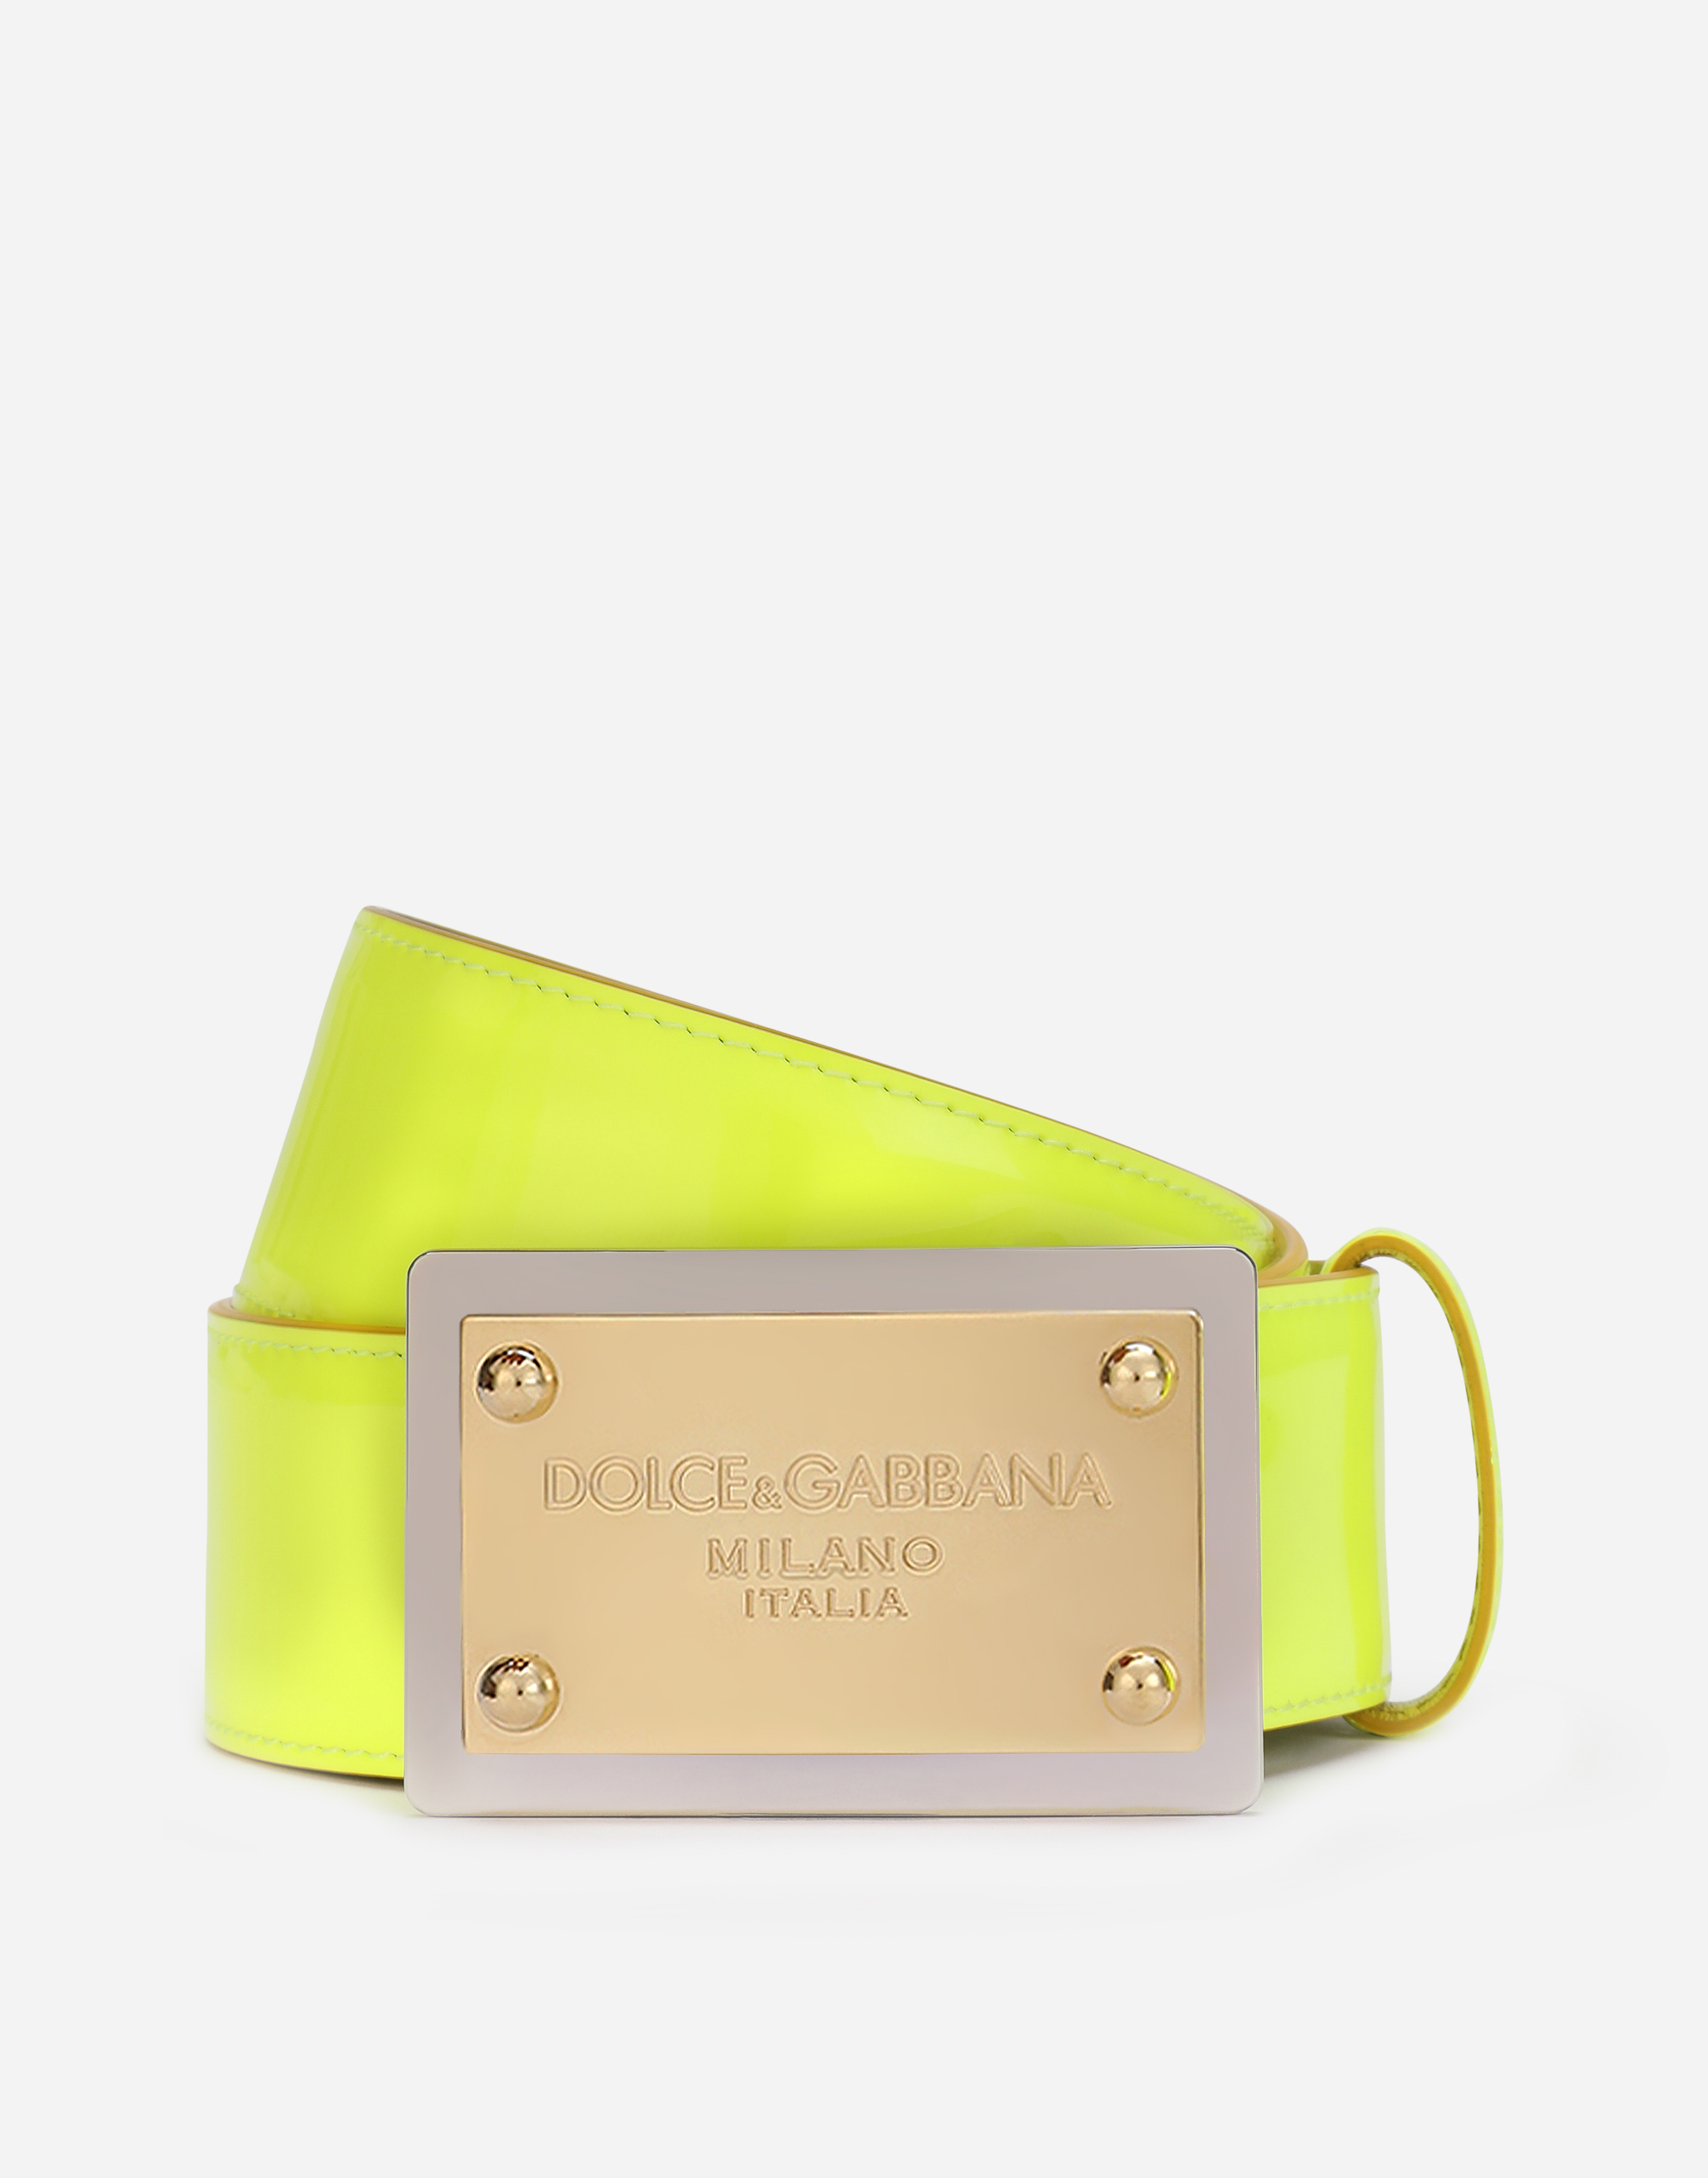 Neon patent leather belt in Yellow